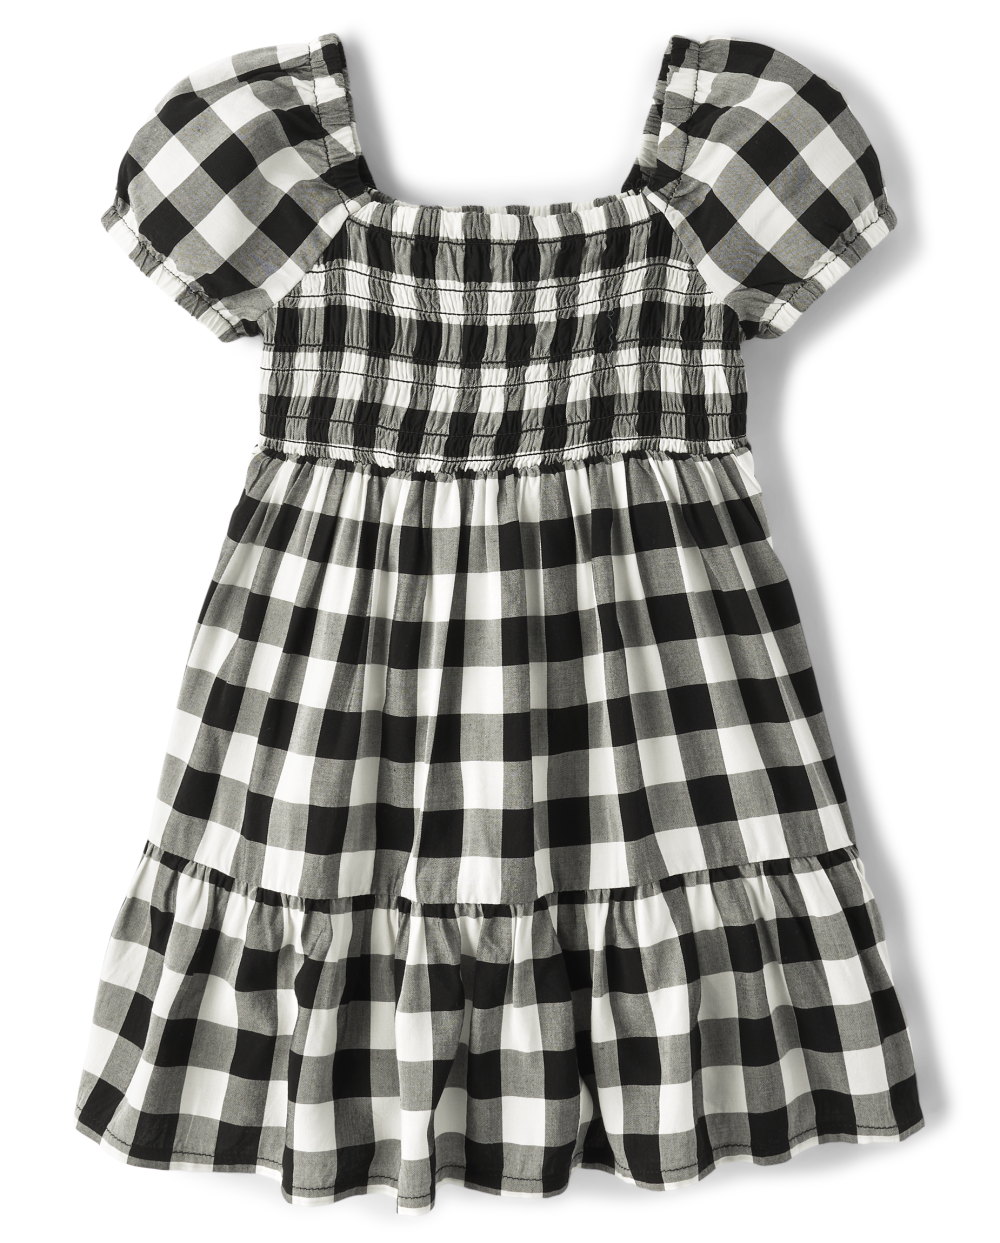 Toddler Above the Knee Puff Sleeves Short Sleeves Sleeves Smocked Square Neck Checkered Gingham Print Rayon Dress With Ruffles